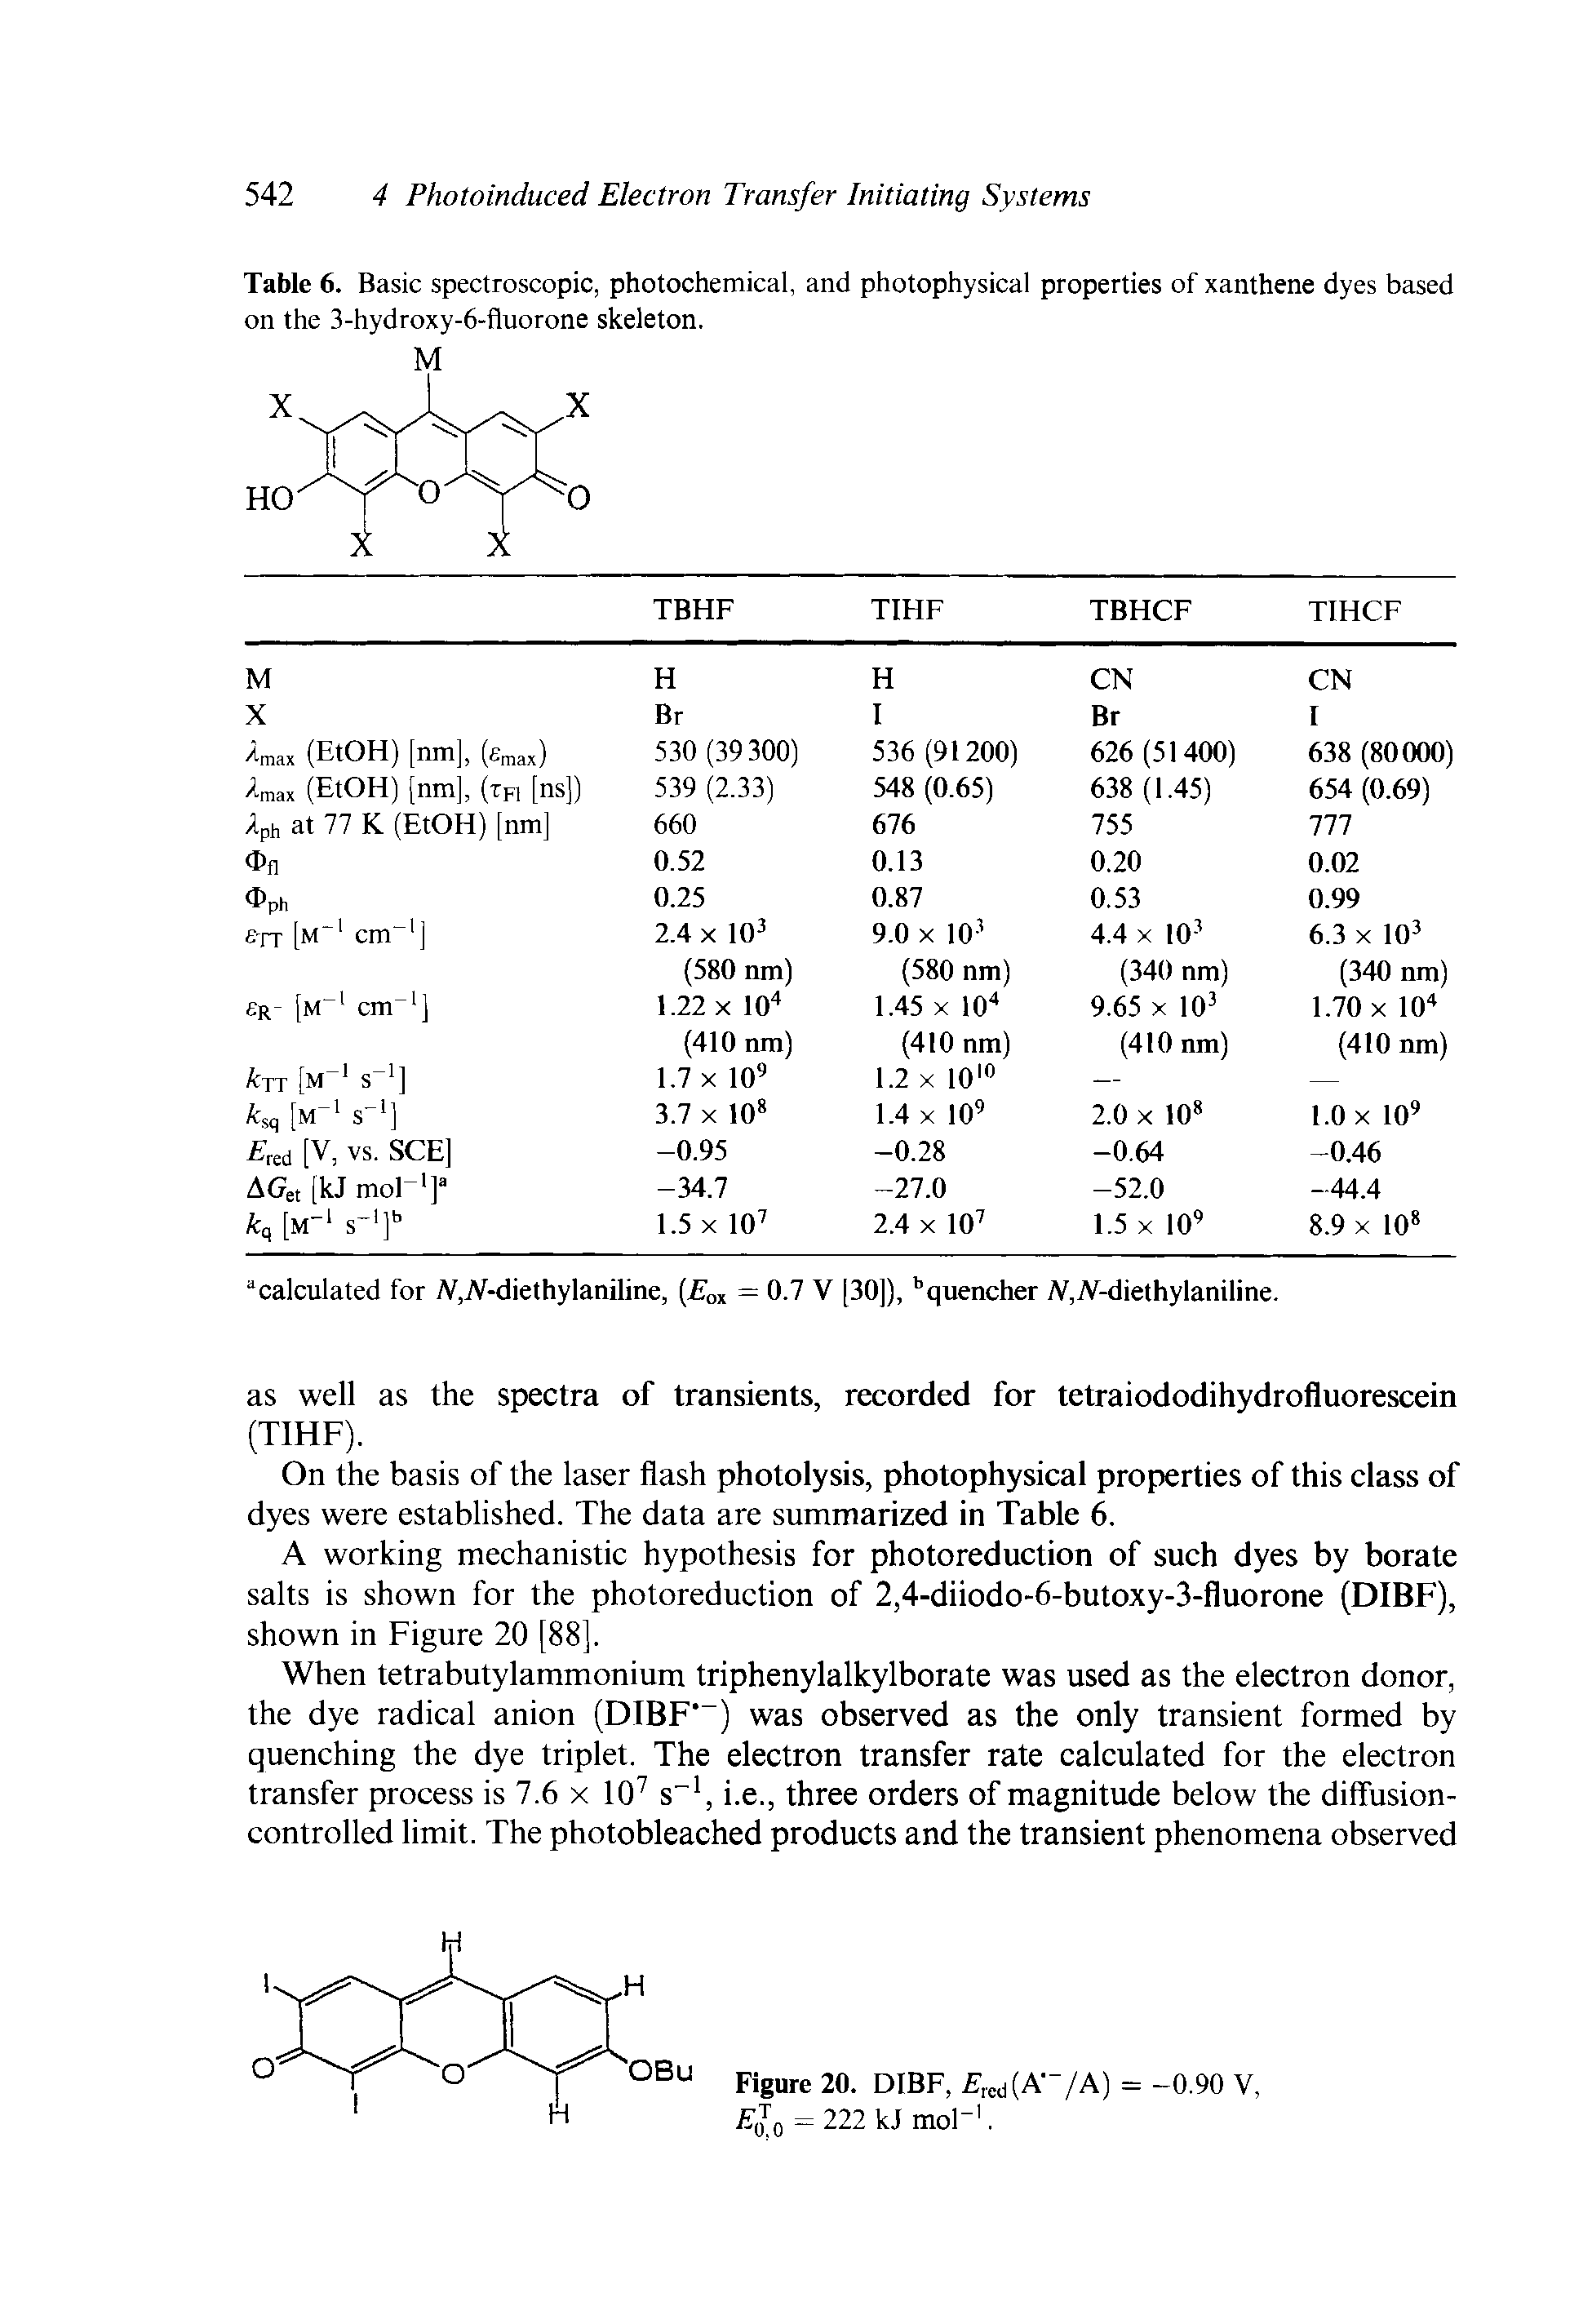 Table 6. Basic spectroscopic, photochemical, and photophysical properties of xanthene dyes based on the 3-hydroxy-6-fluorone skeleton.